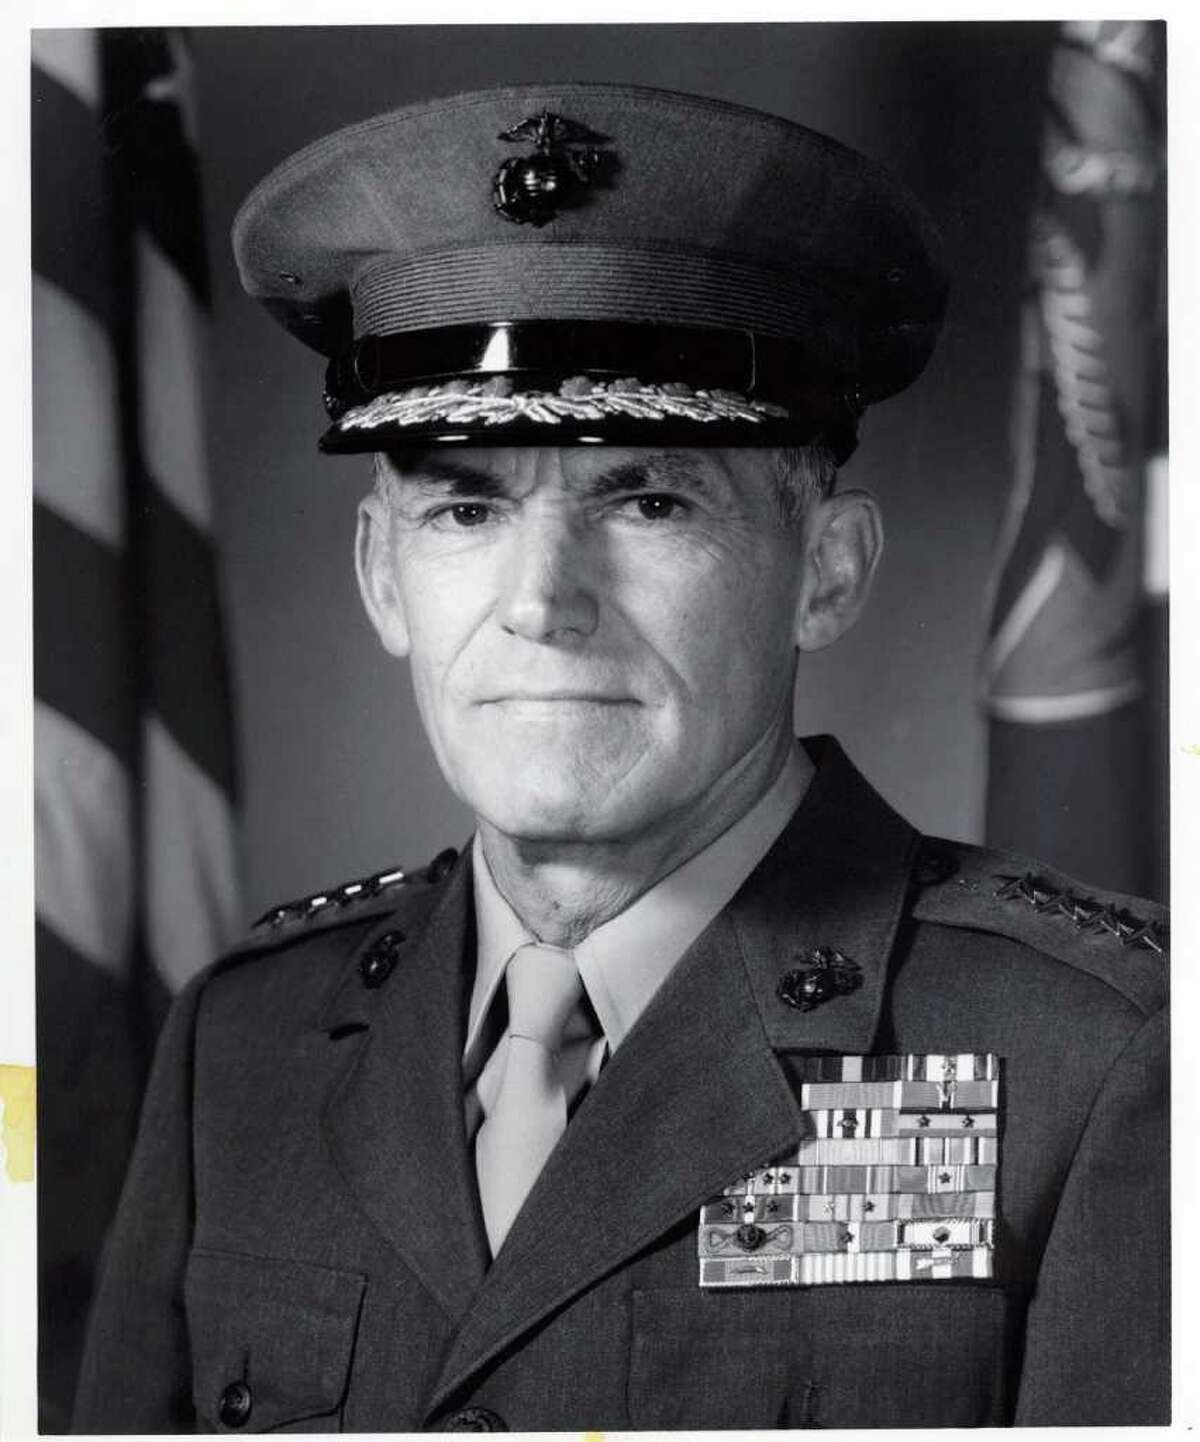 Ansonia, Conn. General Samuel Jaskilka, who served as Assistant Commandant of the Marine Corps, died on Jan. 15, 2012. He retired from the Corps in 1978 after 36 years of service. He was buried Thursday, Jan. 26 in Arlington National Cemetery.